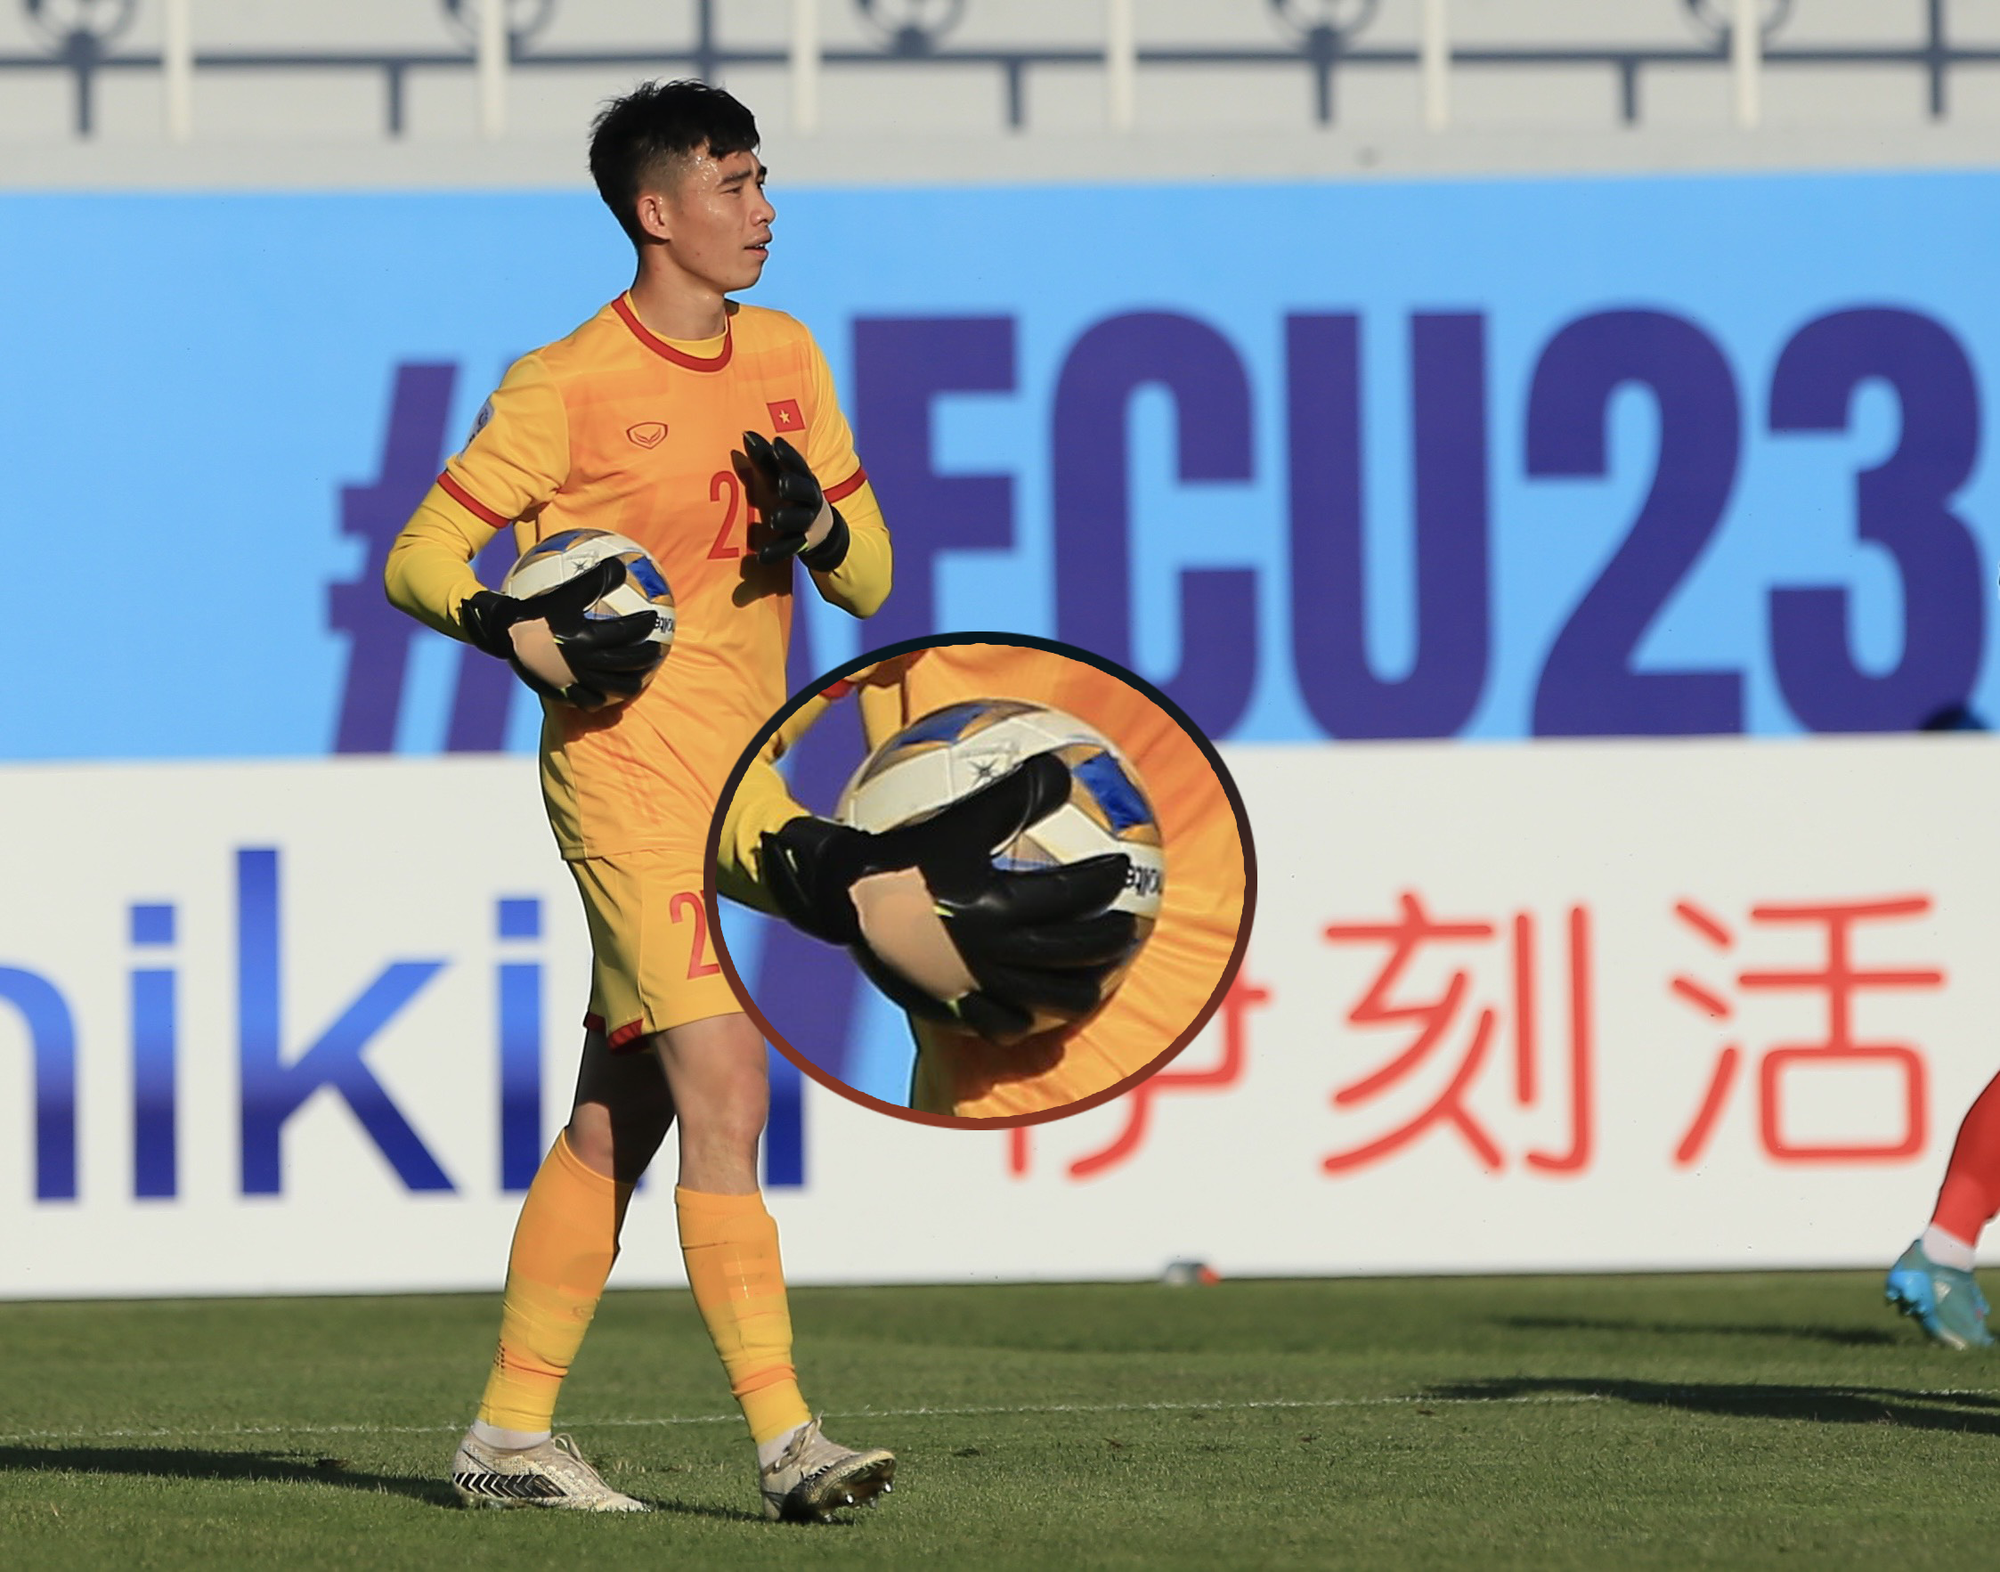 Vietnam U23 goalkeeper had to patch his gloves because of strange rules at the 2022 AFC U23 Championship - Photo 1.